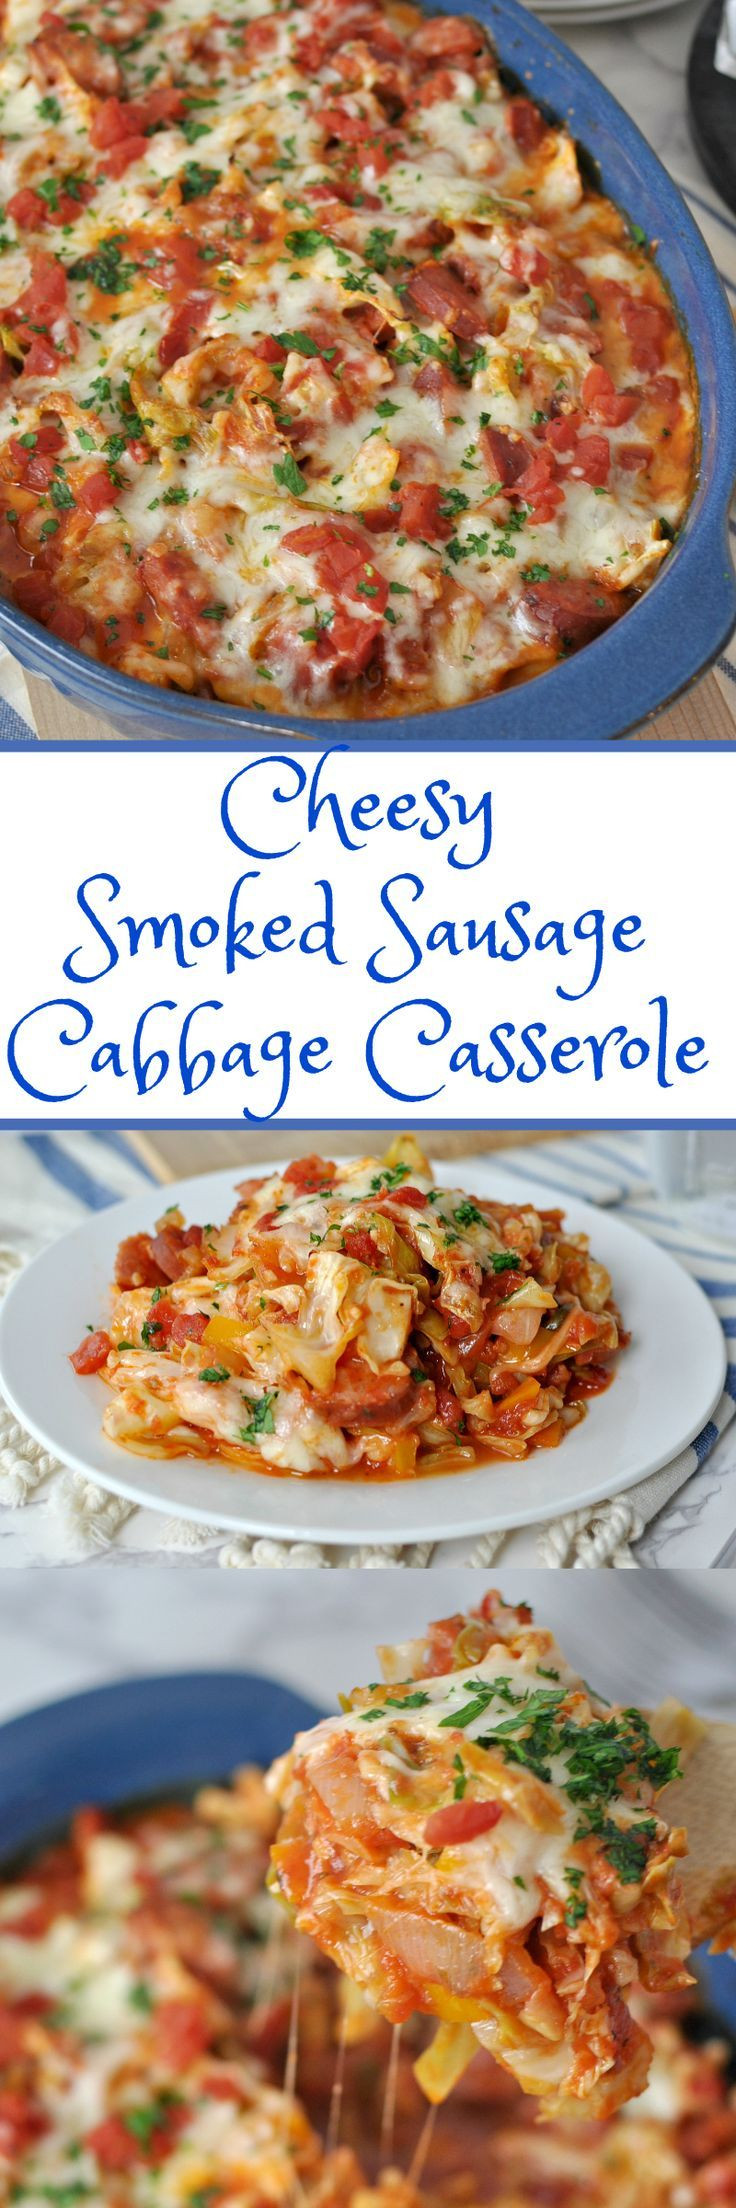 Turkey Sausage Recipes Low Carb
 Cheesy Sausage and Cabbage Casserole Recipe